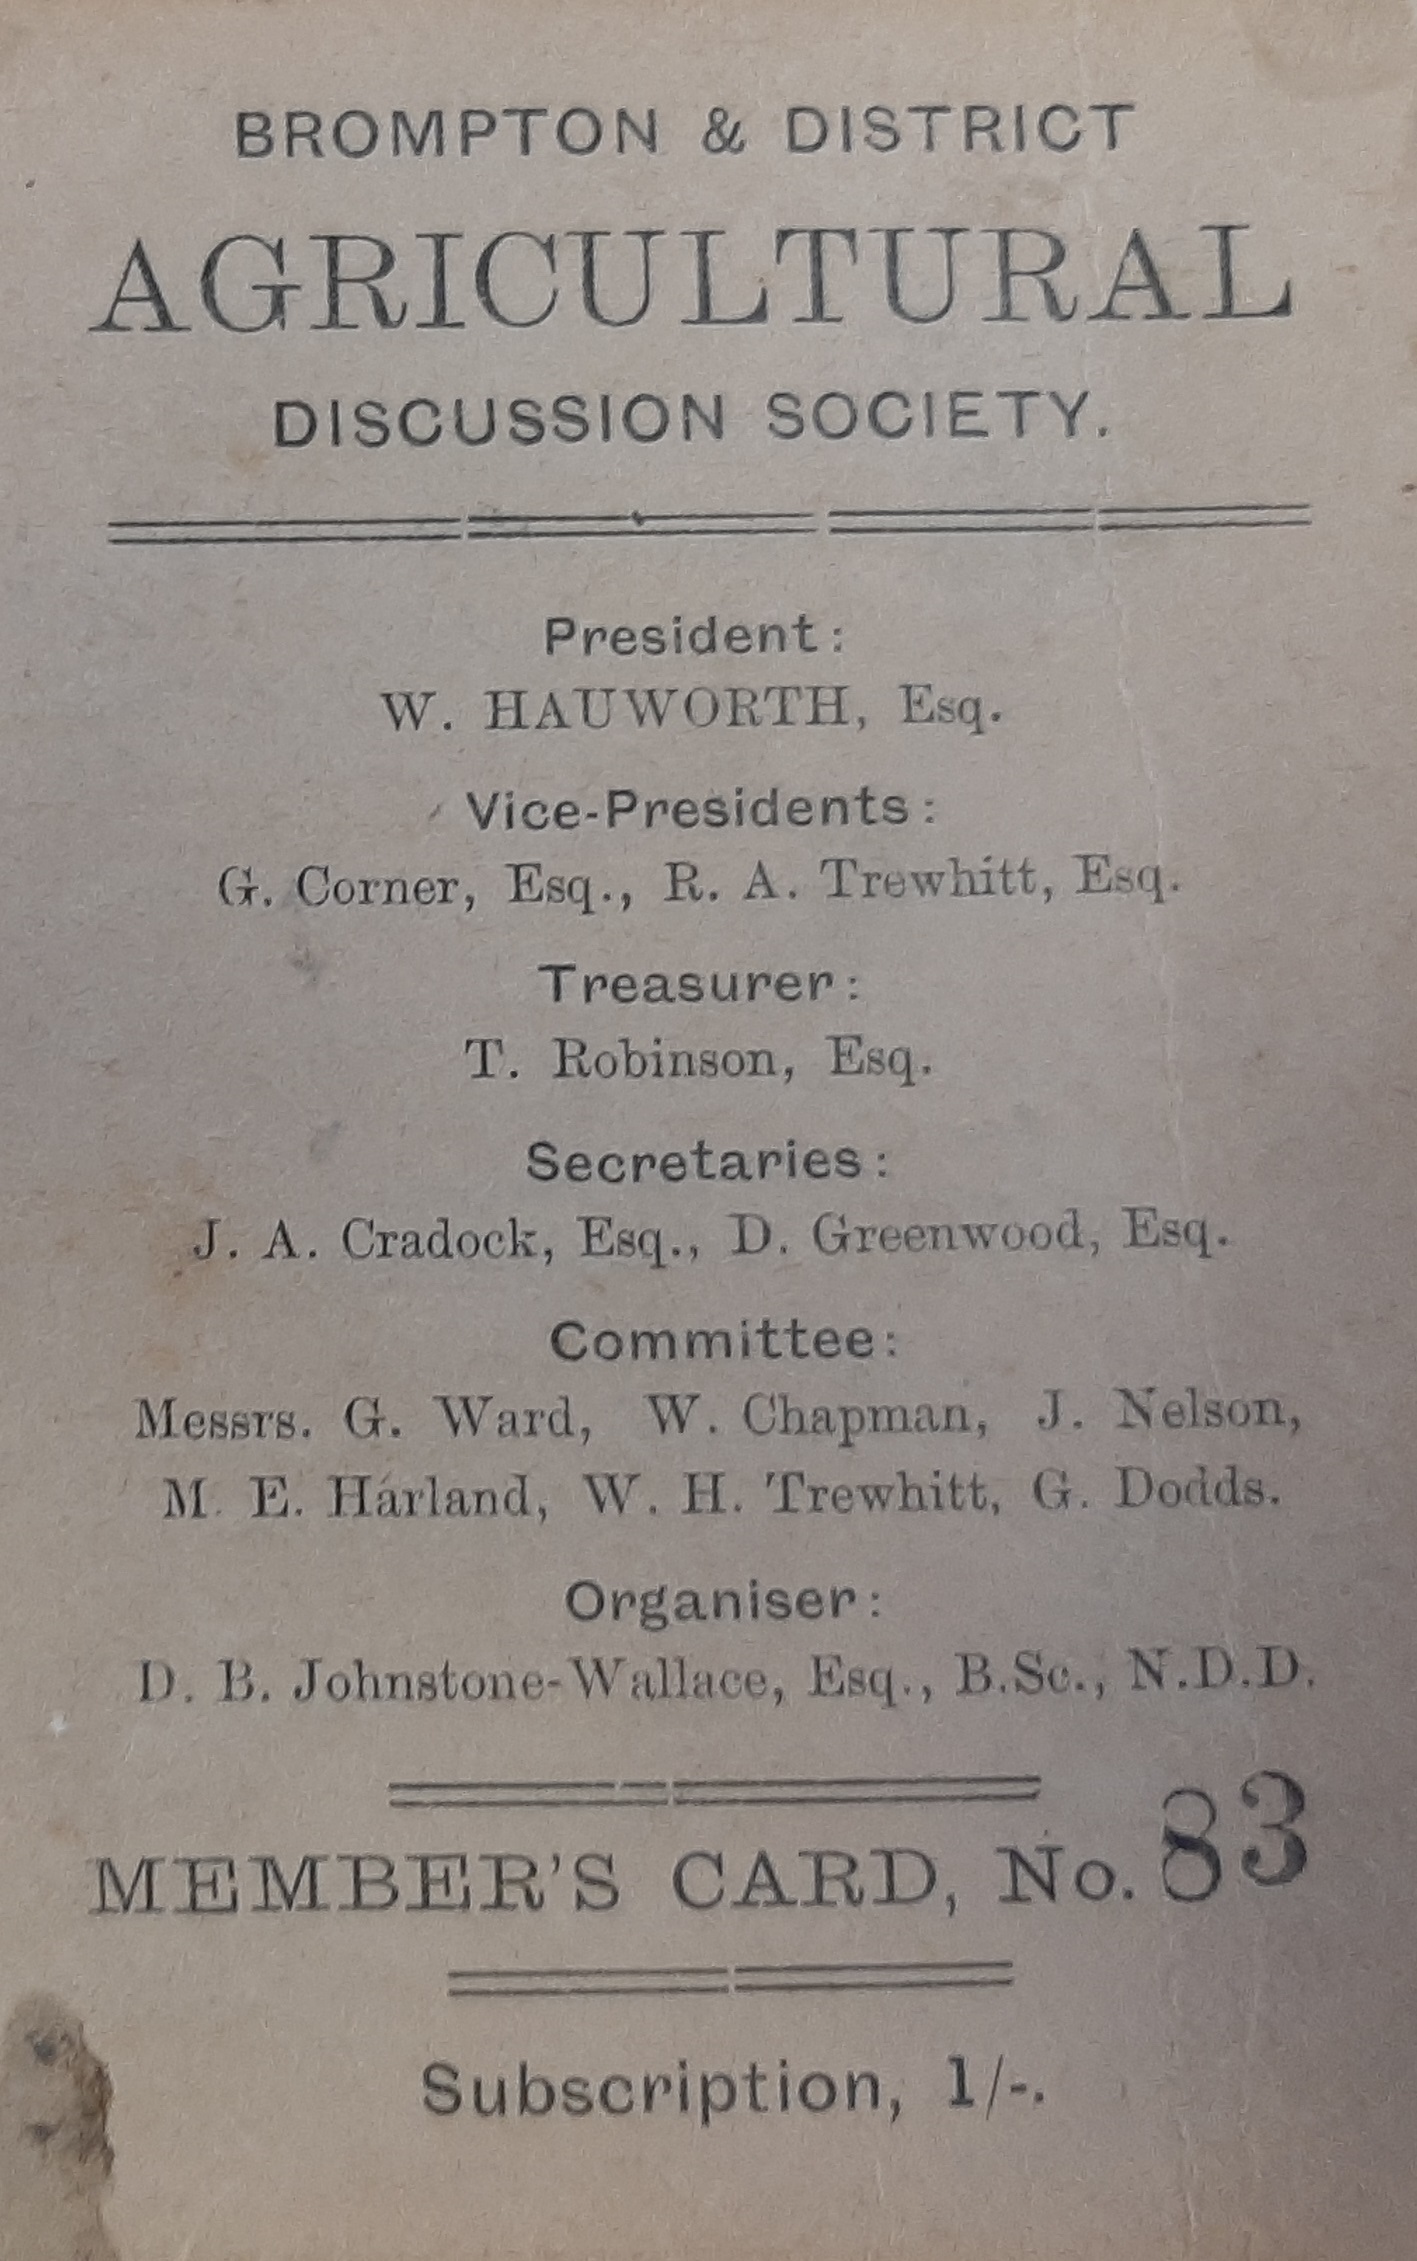 The cover of the first ever program for Brompton and District Agricultural Discussion Society